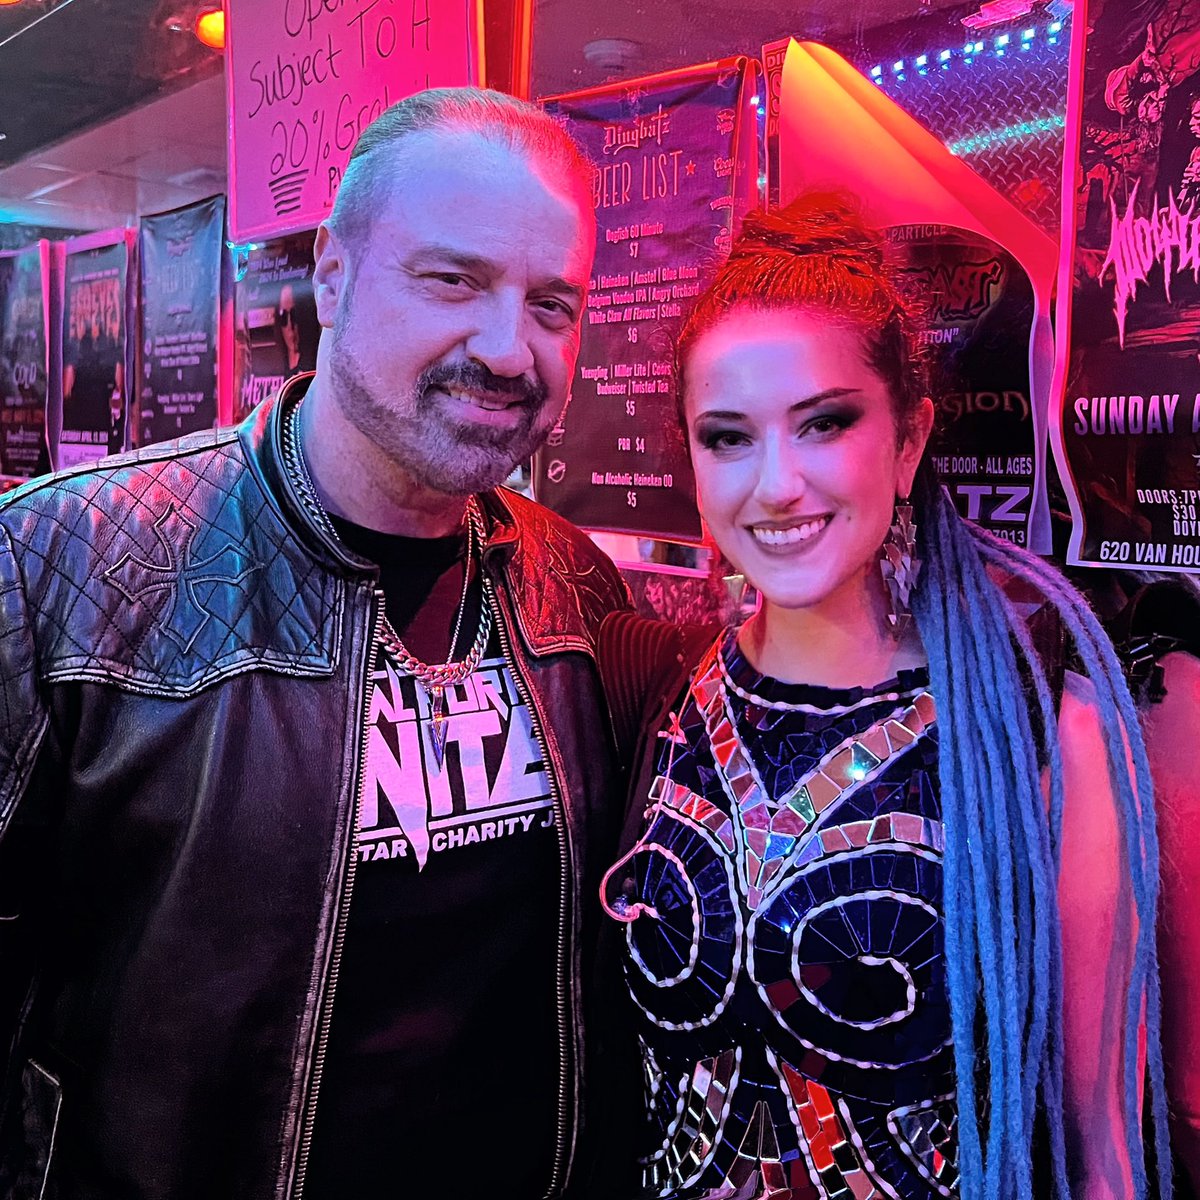 Symphony X was the first metal band that I started listening to… and a huge inspiration! It was an honor to have Russell Allen at the kickstart of our tour! Someone I’ve looked up to as a singer for so long! Thank you!!! 🙌 #symphonyx #metal